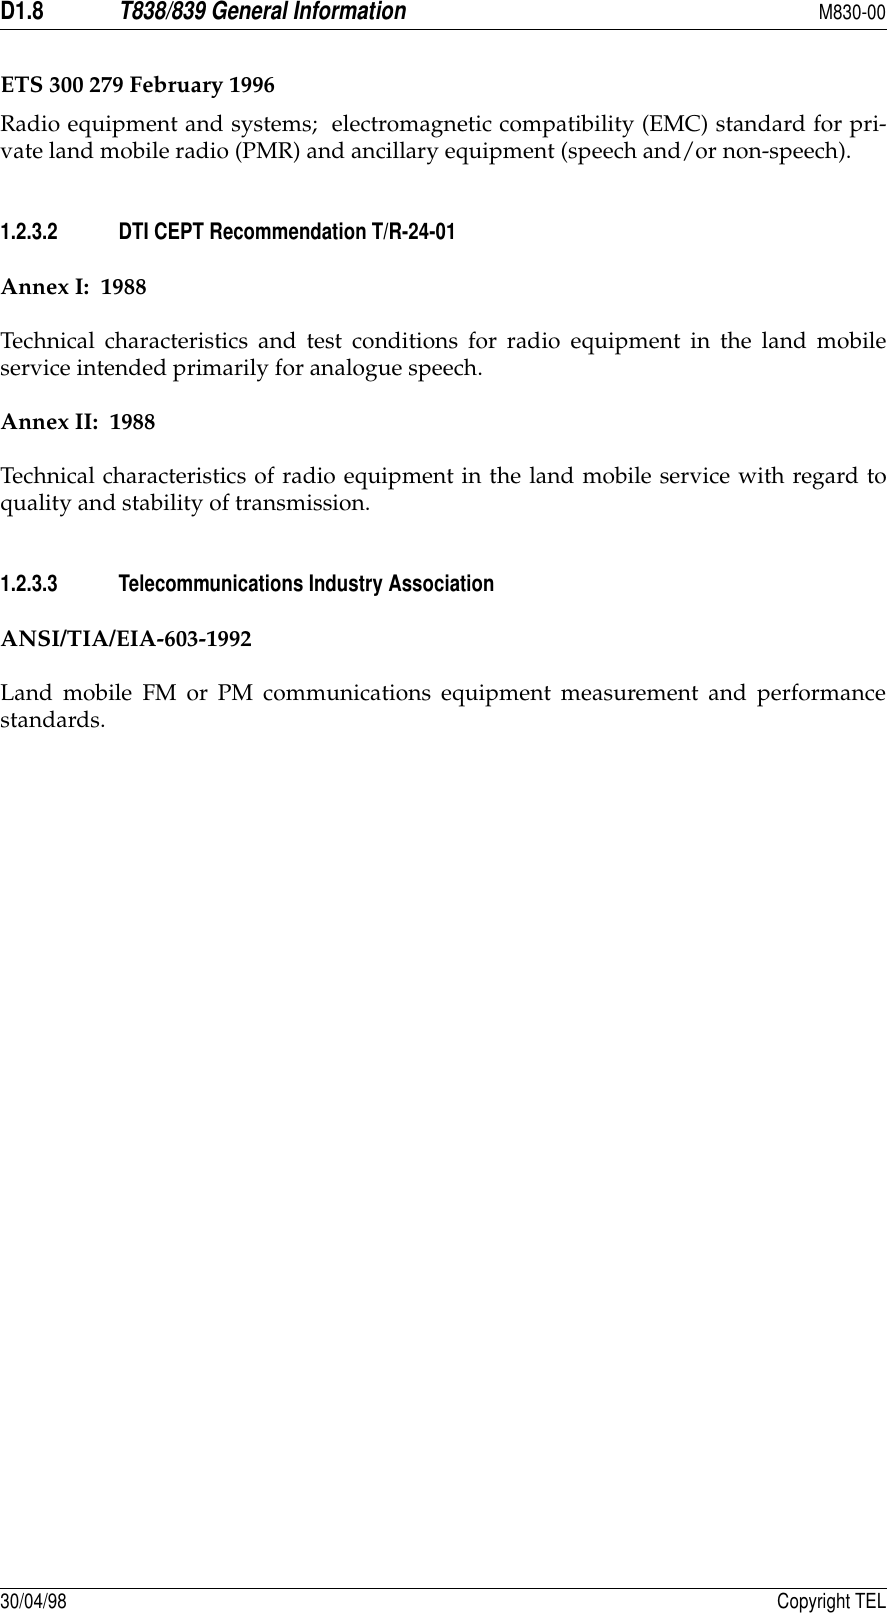 D1.8T838/839 General InformationM830-0030/04/98 Copyright TELETS 300 279 February 1996Radio equipment and systems;  electromagnetic compatibility (EMC) standard for pri-vate land mobile radio (PMR) and ancillary equipment (speech and/or non-speech).1.2.3.2 DTI CEPT Recommendation T/R-24-01Annex I:  1988Technical characteristics and test conditions for radio equipment in the land mobileservice intended primarily for analogue speech.Annex II:  1988Technical characteristics of radio equipment in the land mobile service with regard toquality and stability of transmission.1.2.3.3 Telecommunications Industry AssociationANSI/TIA/EIA-603-1992Land mobile FM or PM communications equipment measurement and performancestandards.